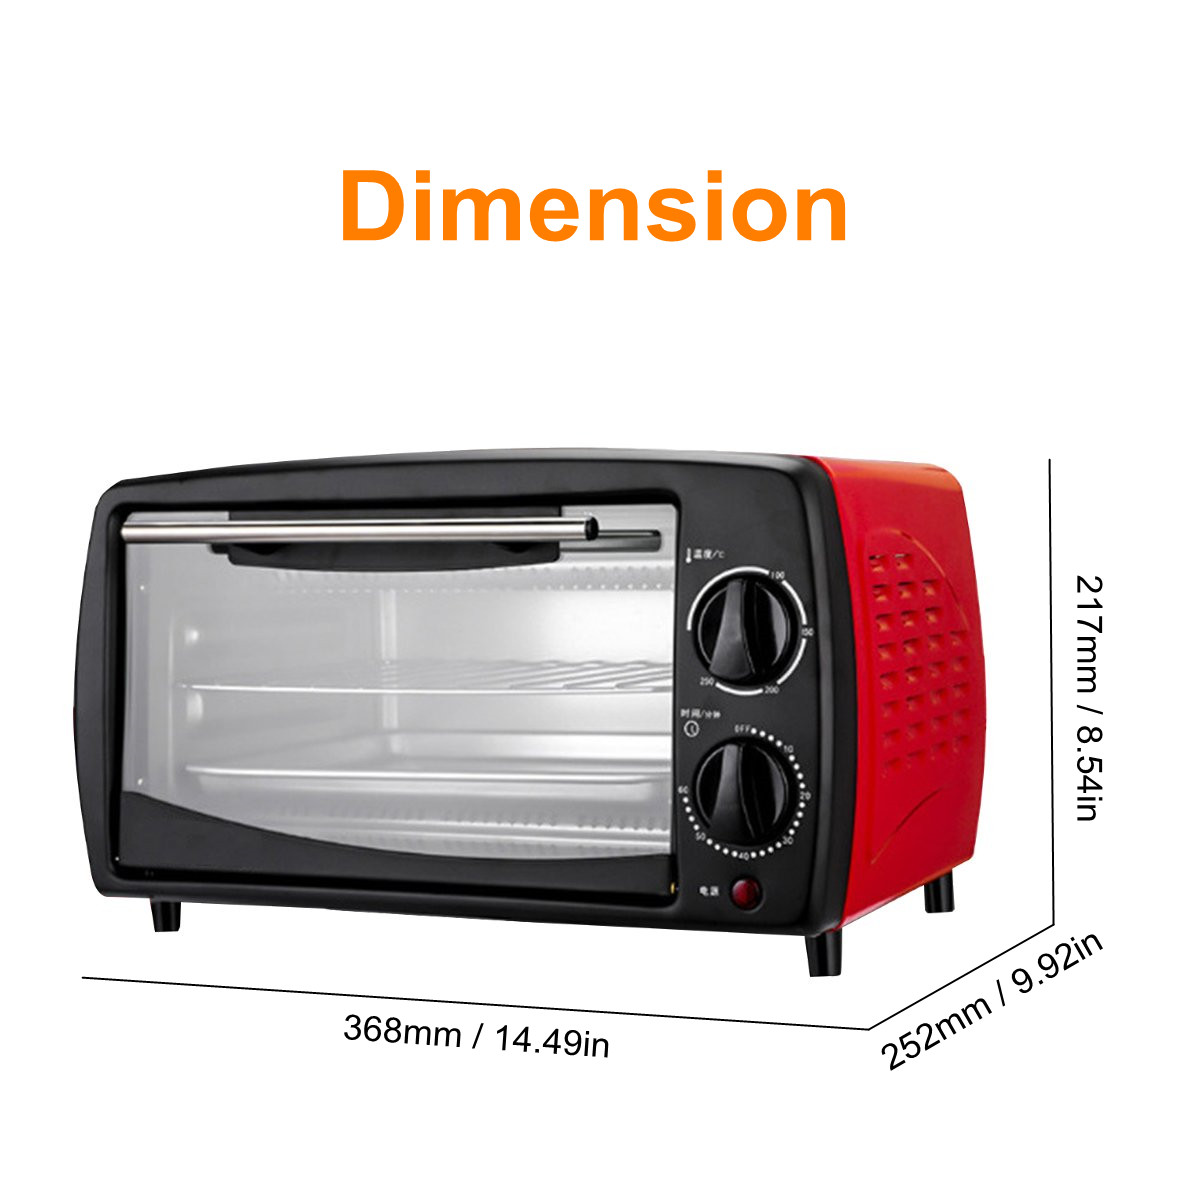 2000W-Convection-Electric-Toaster-Oven-12L-Countertop-Bake-Broil-Toast-Pizza-1671629